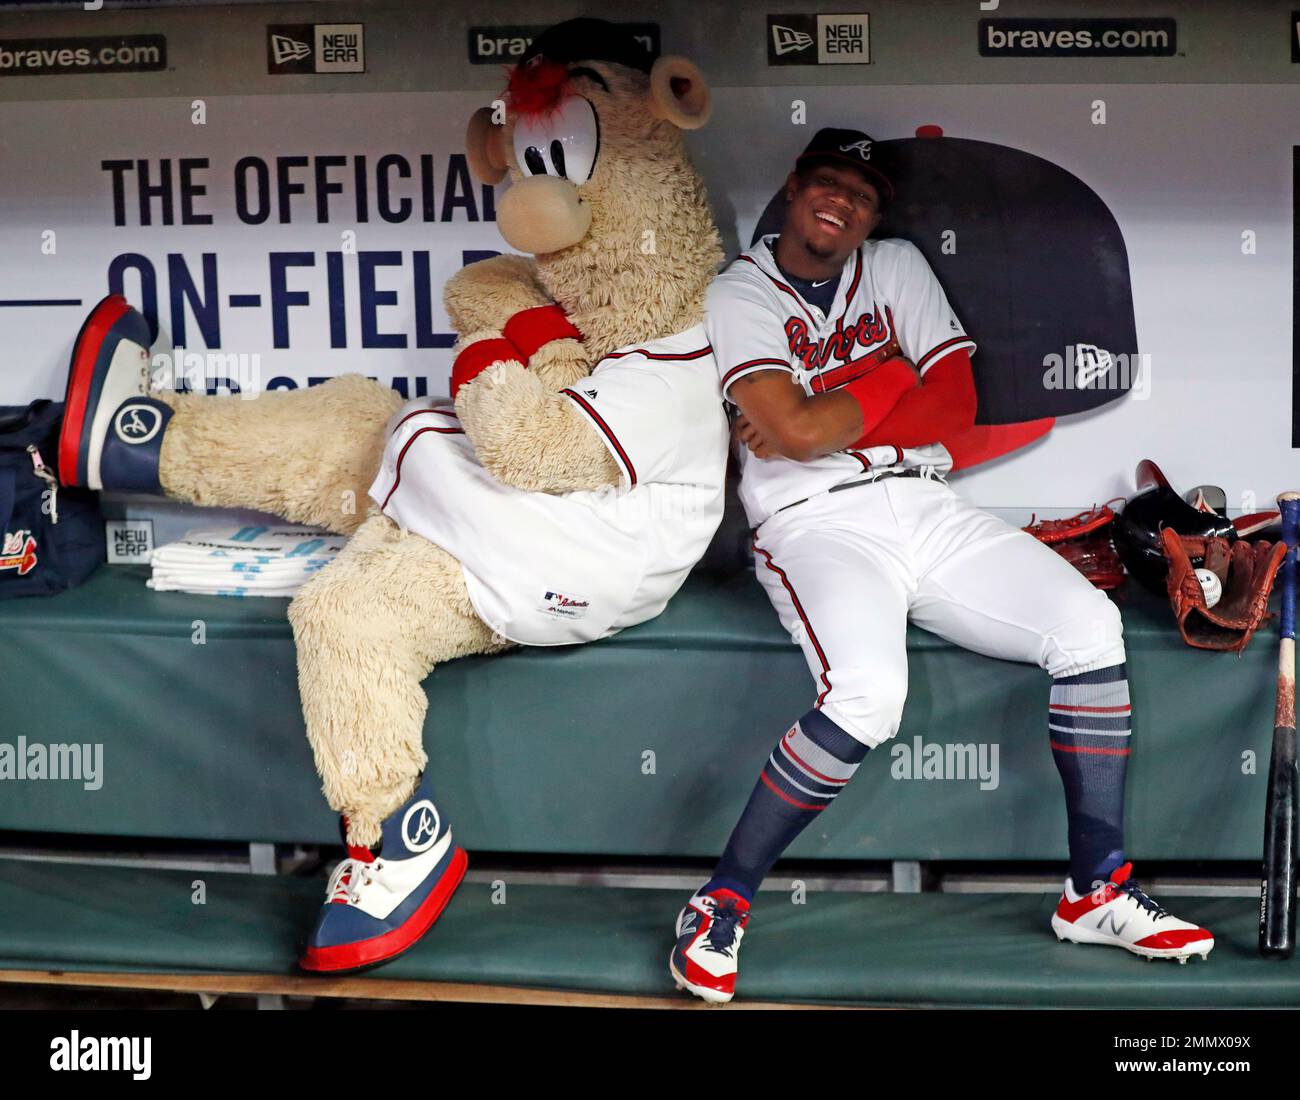 Atlanta Braves left fielder Ronald Acuna Jr. (13) and Braves mascots Blooper  have fun in the dugout before am baseball game against the Miami Marlins  Tuesday, July 31, 2018 in Atlanta. (AP